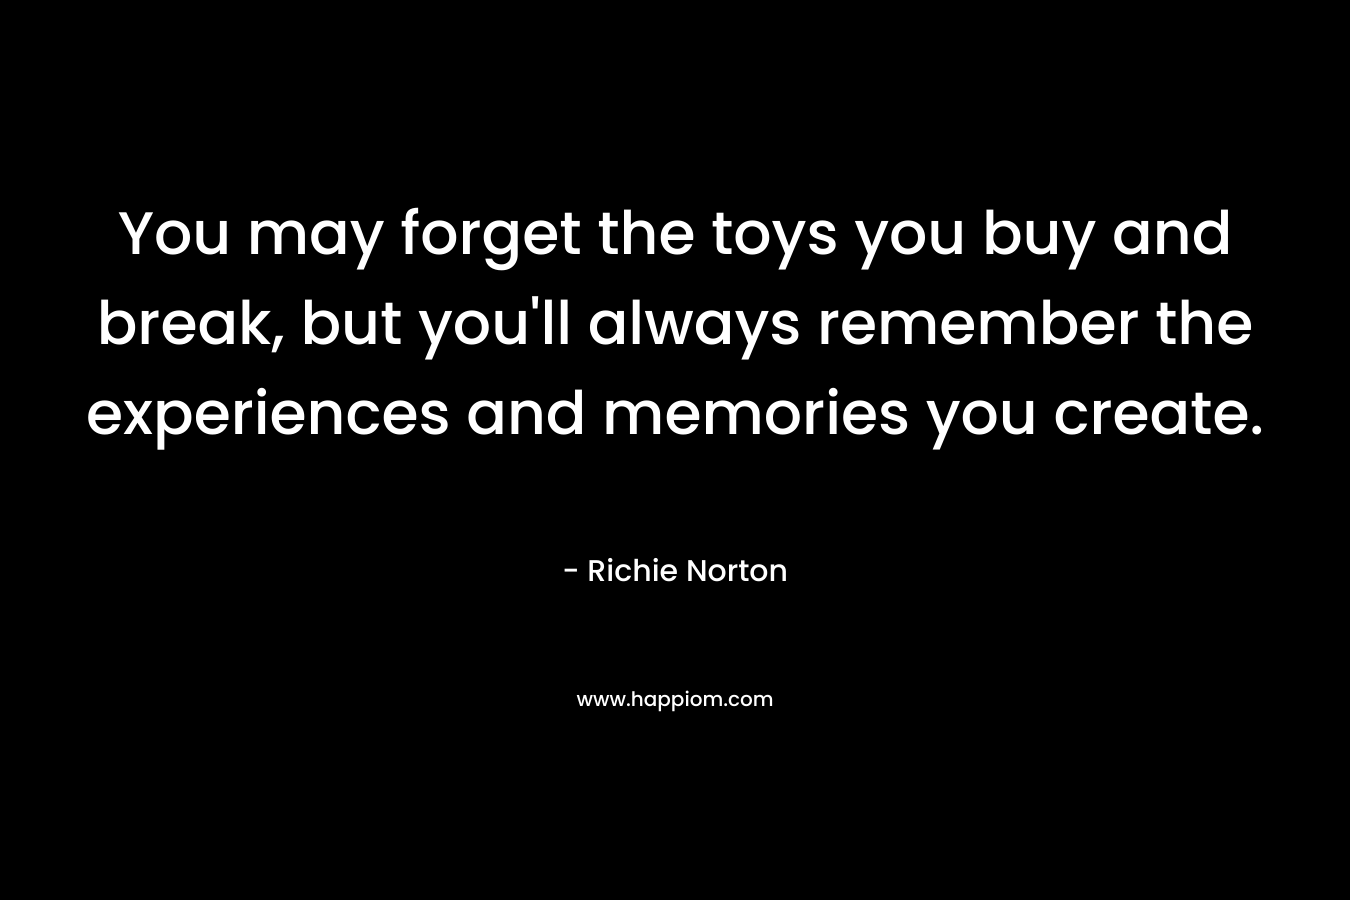 You may forget the toys you buy and break, but you'll always remember the experiences and memories you create.